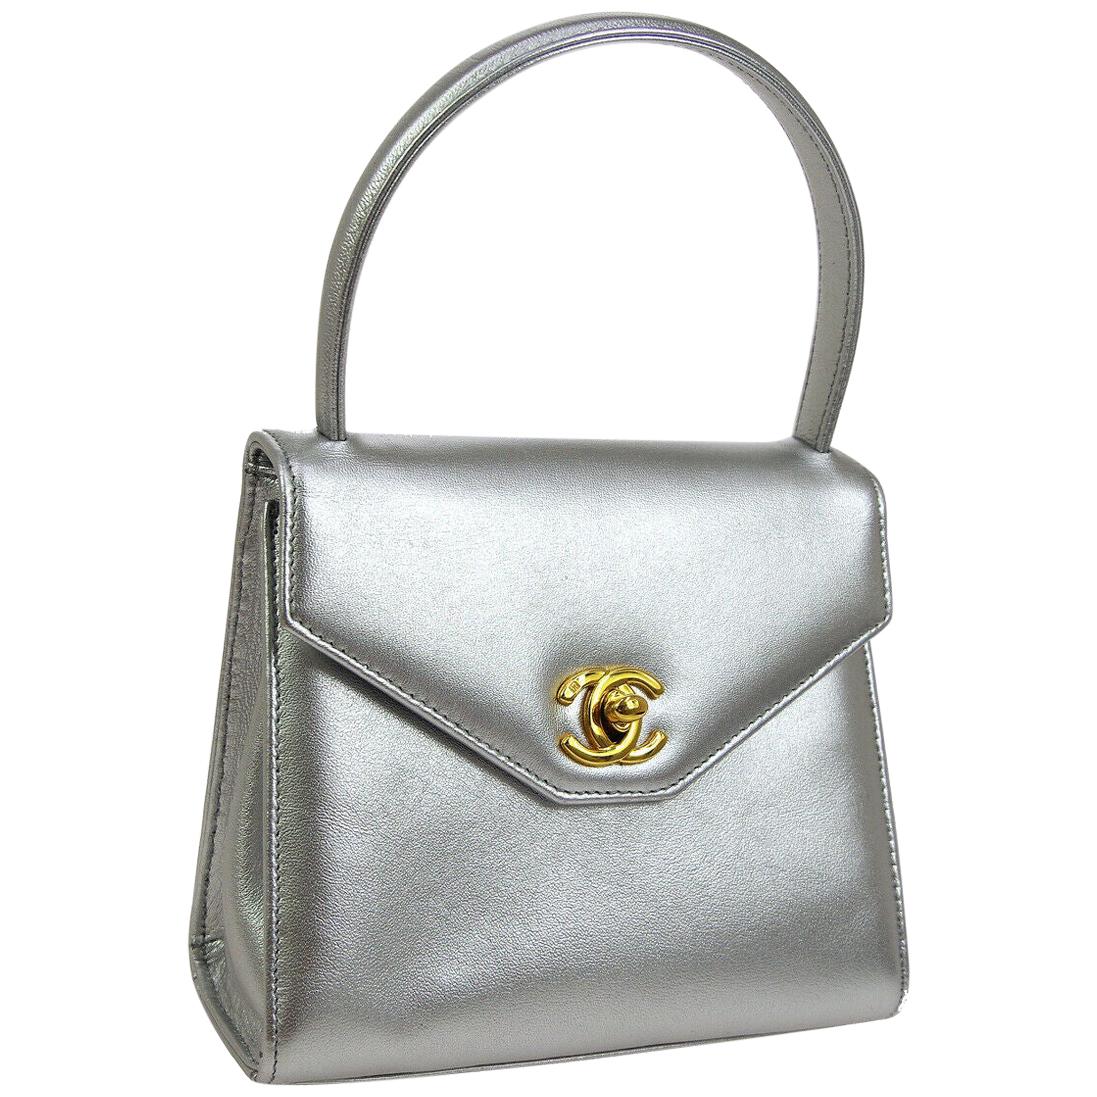 Chanel Silver Metallic Leather Gold Small Kelly Top Handle Satchel Bag in Box